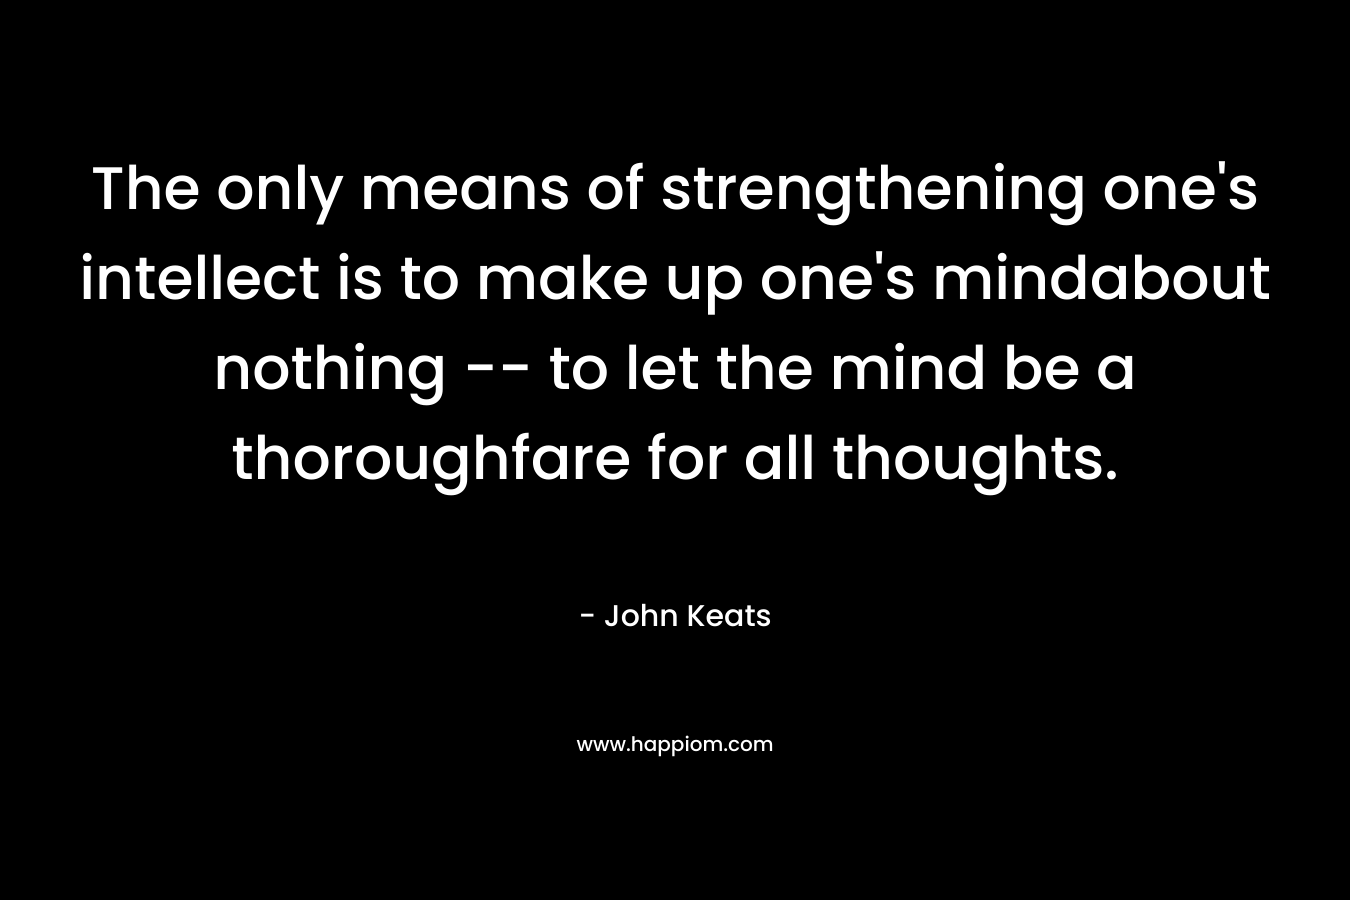 The only means of strengthening one’s intellect is to make up one’s mindabout nothing — to let the mind be a thoroughfare for all thoughts. – John Keats